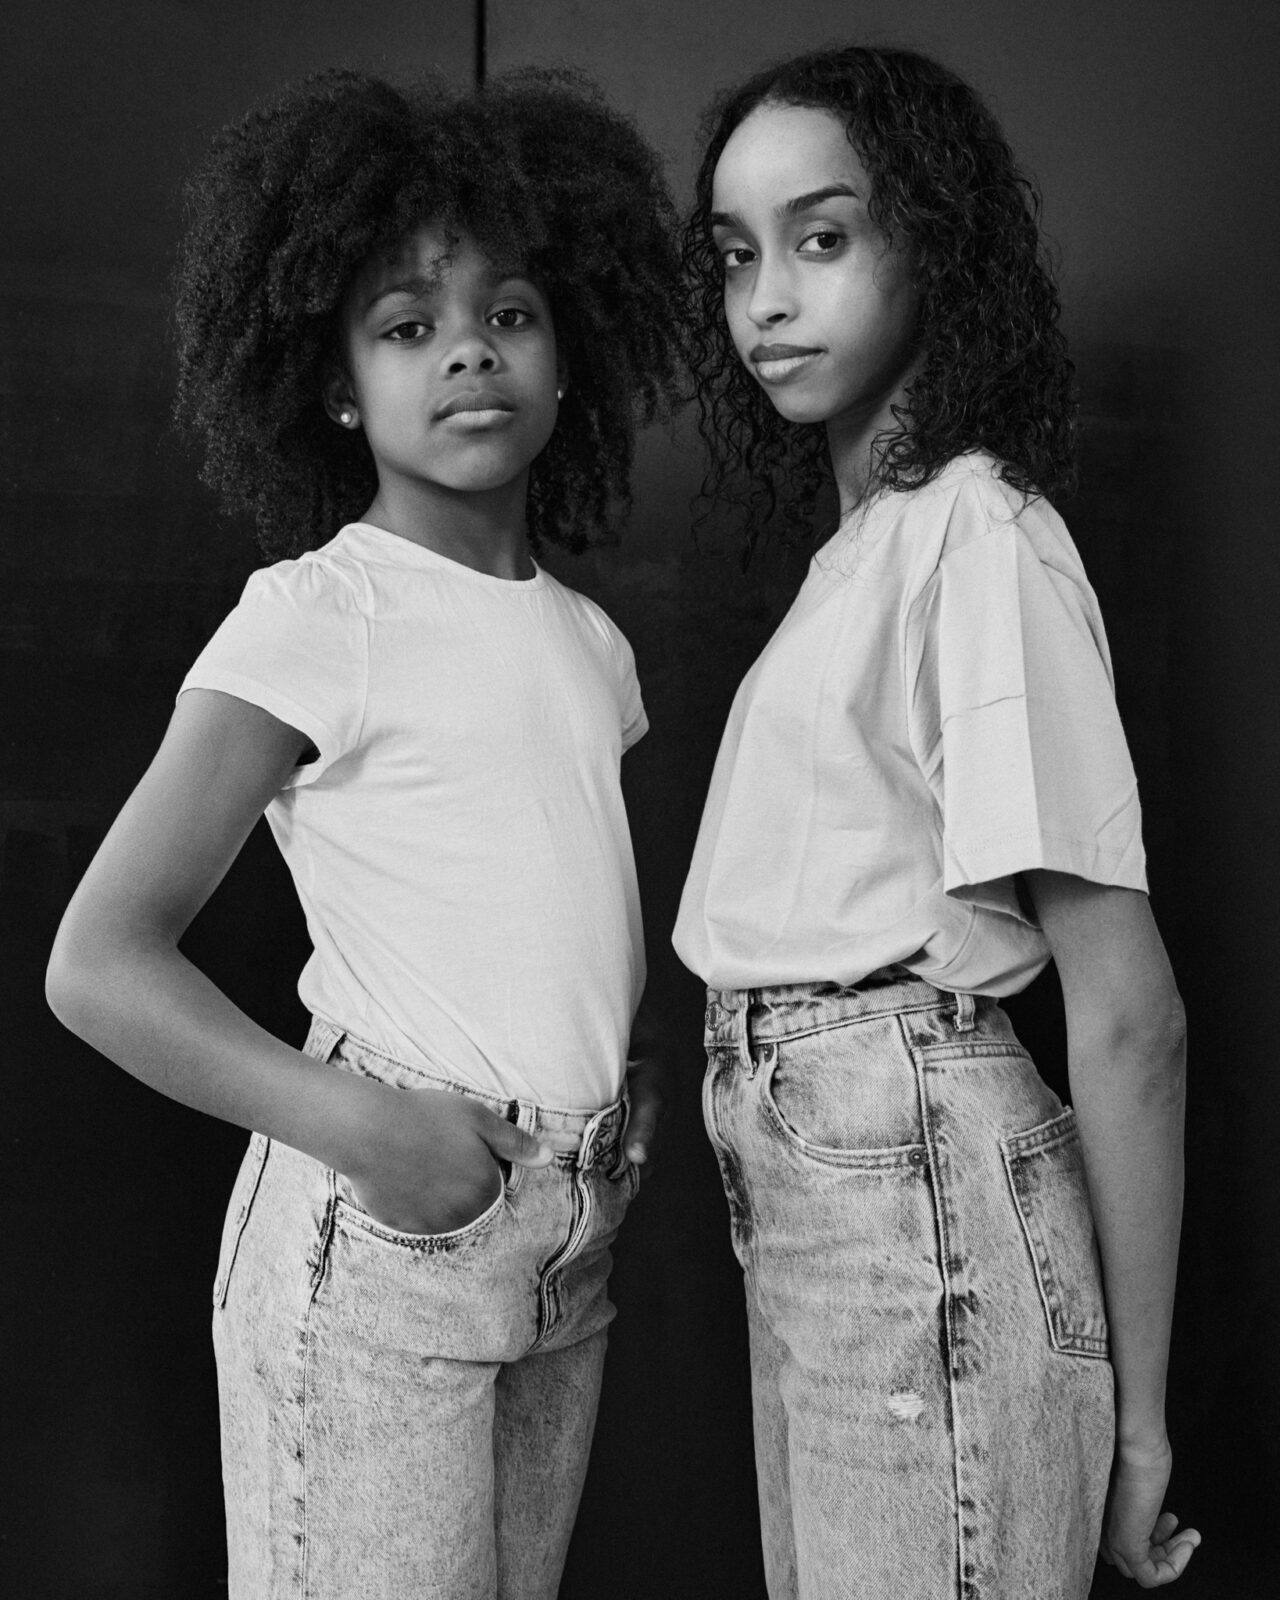 Kids posing in white tshirts and jeans